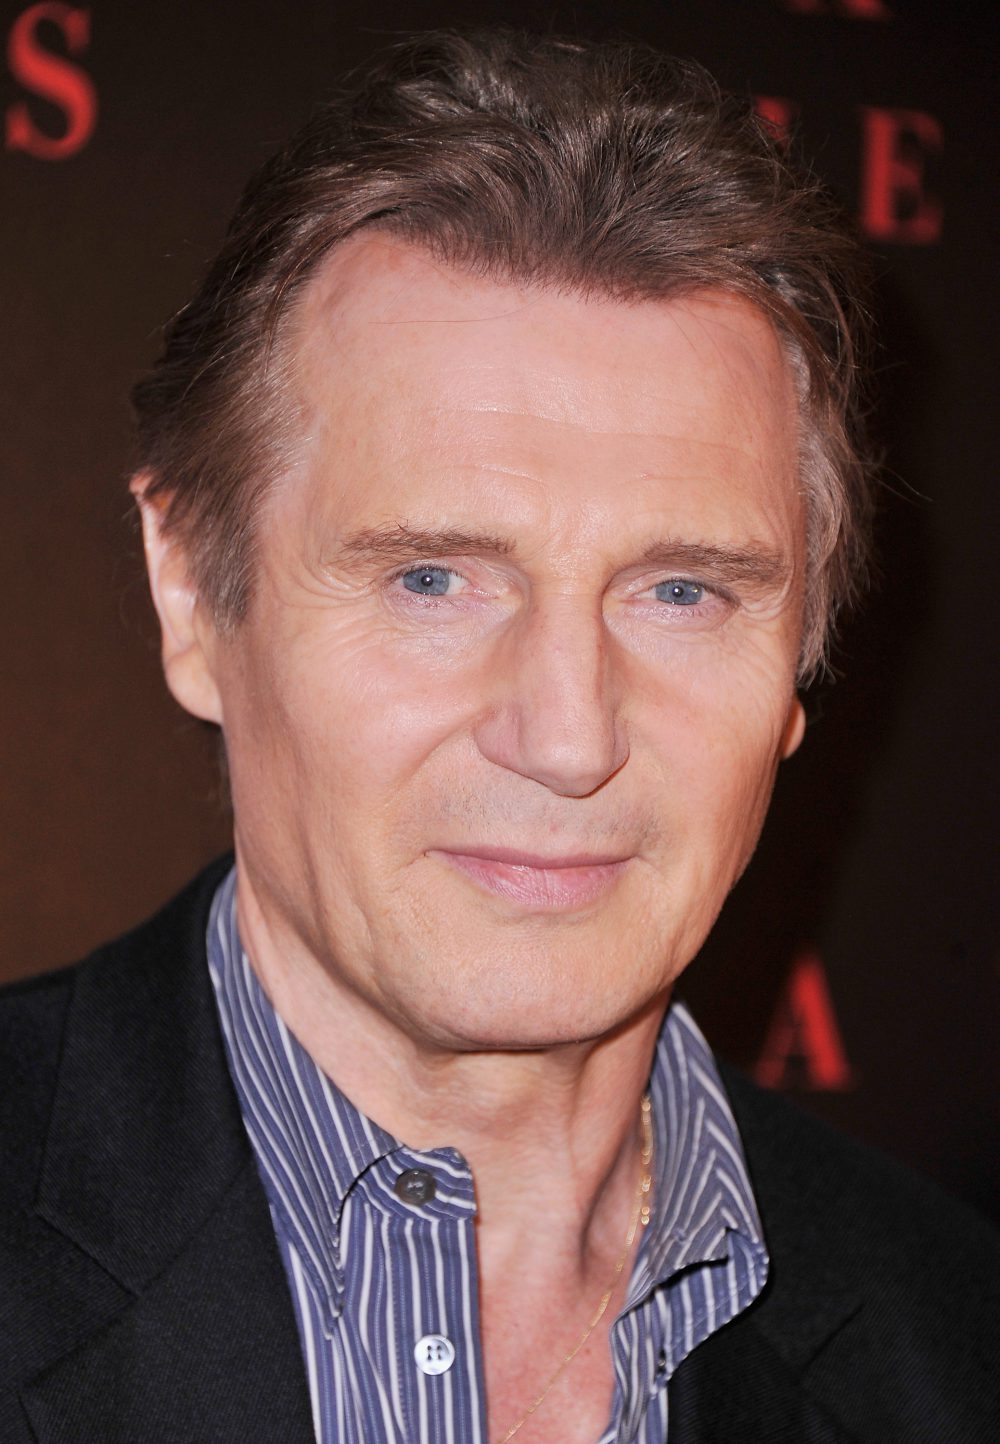 Actor Liam Neeson attends the Universal Pictures and Cross Creek Pictures with The Cinema Society screening of "A Walk Among the Tombstones" at Chelsea Bow Tie Cinemas on Sept. 17, 2014 in New York City.